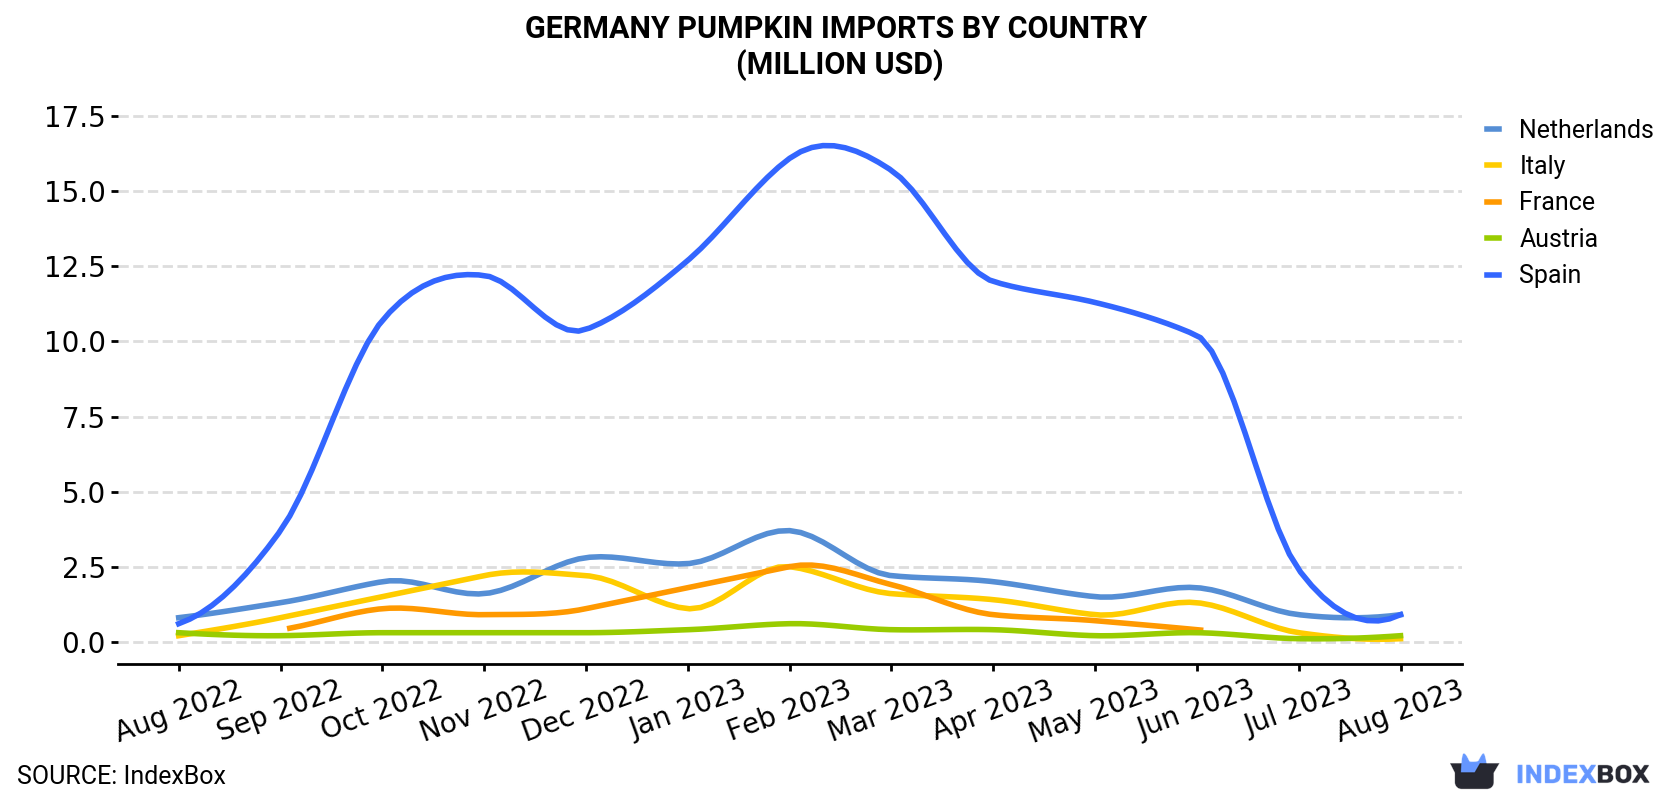 Germany Pumpkin Imports By Country (Million USD)